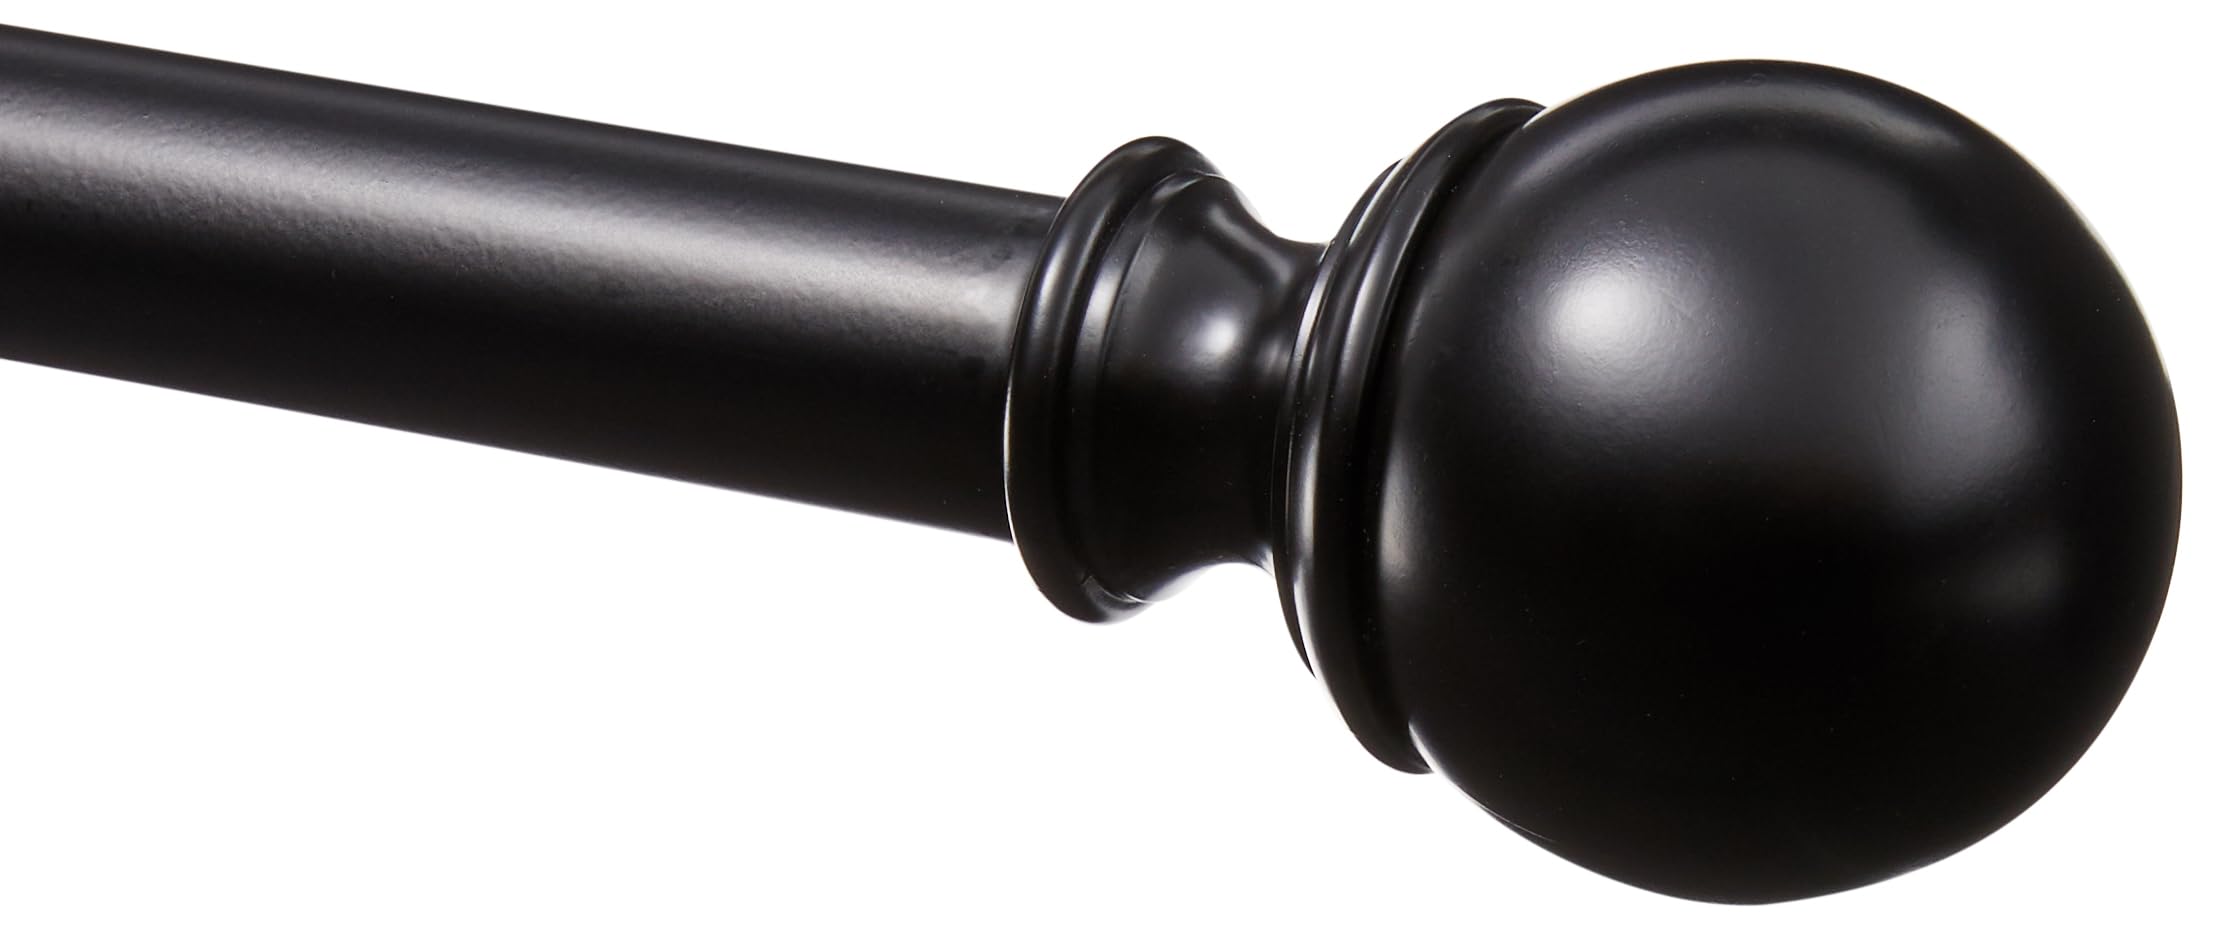 Amazon Basics 1-Inch Curtain Rod with Round Finials, 1-Pack, 72